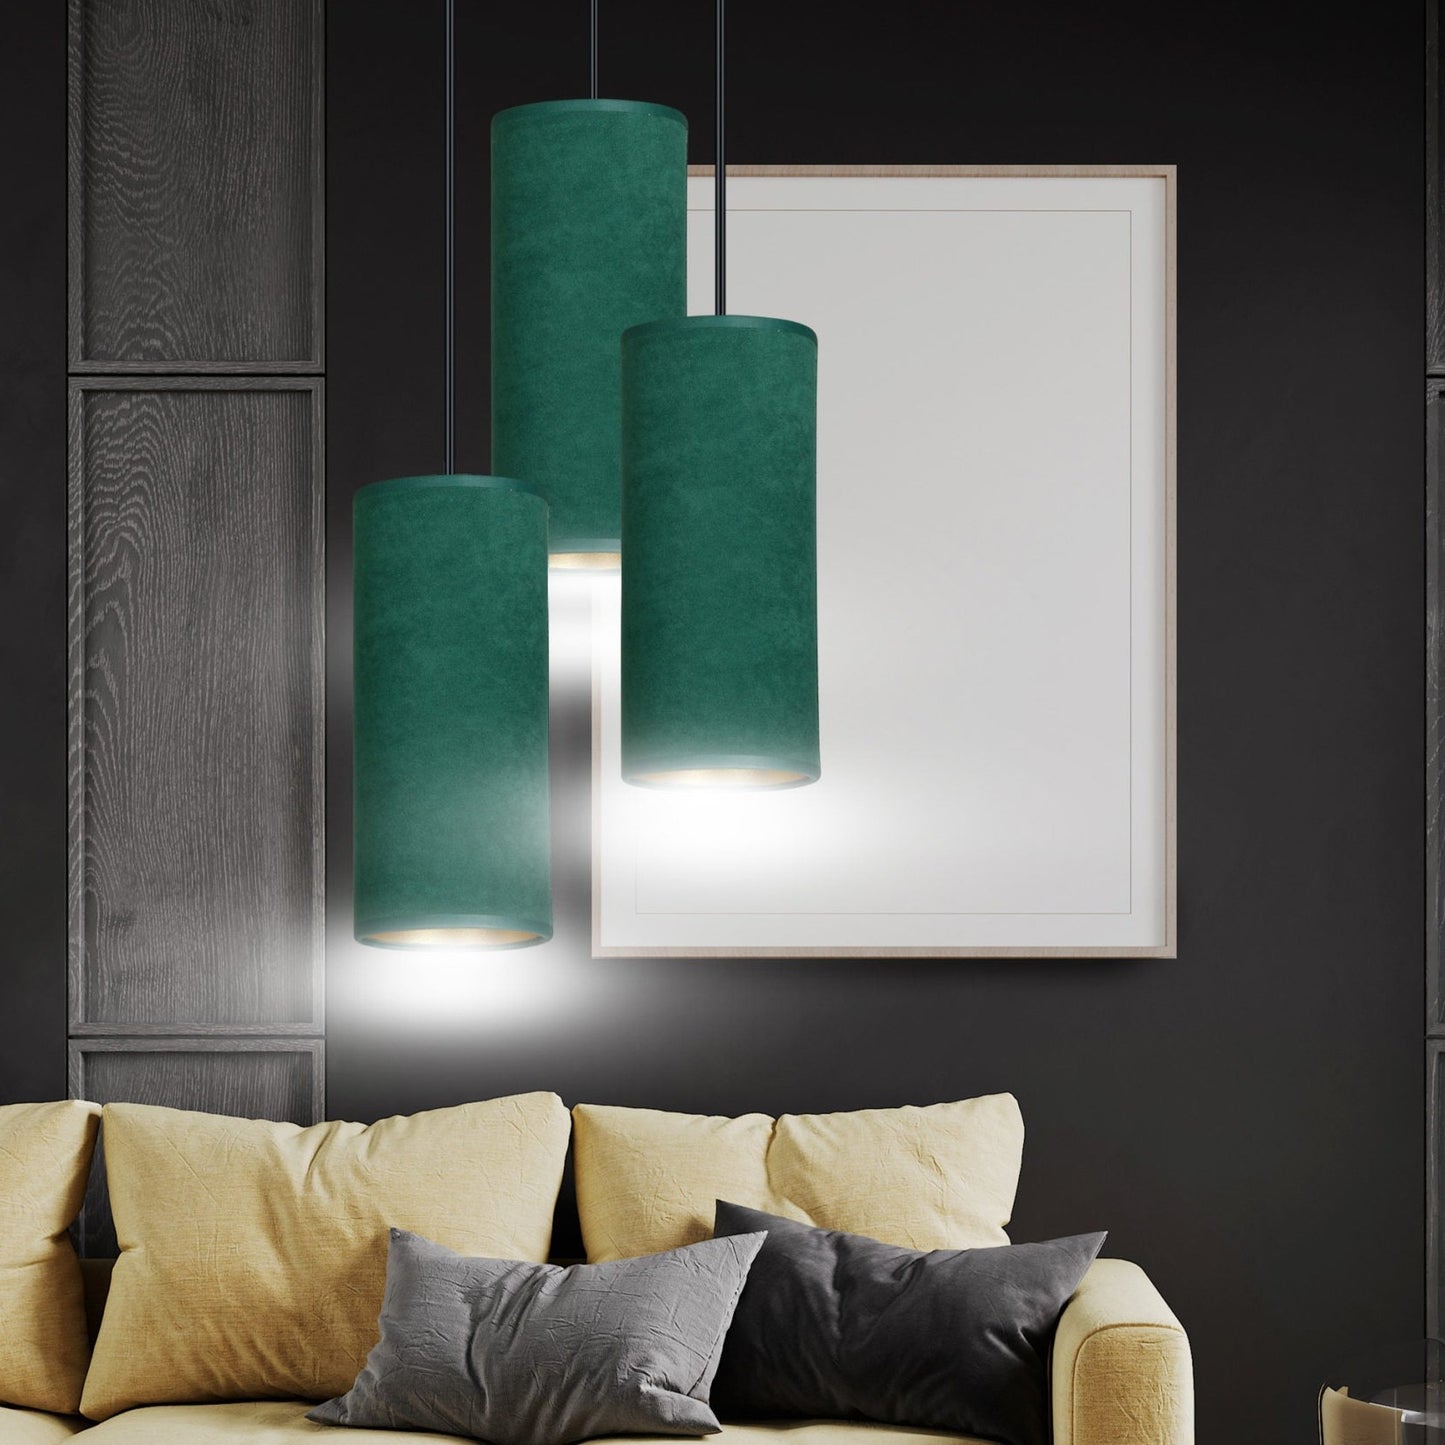 Our Bente is modern and contemporary in its design which is inspired by the industrial trend with a touch of opulence. The shades are made from a luxury green fabric with a golden inner creating a stand out feature for any living, dining or bedroom.